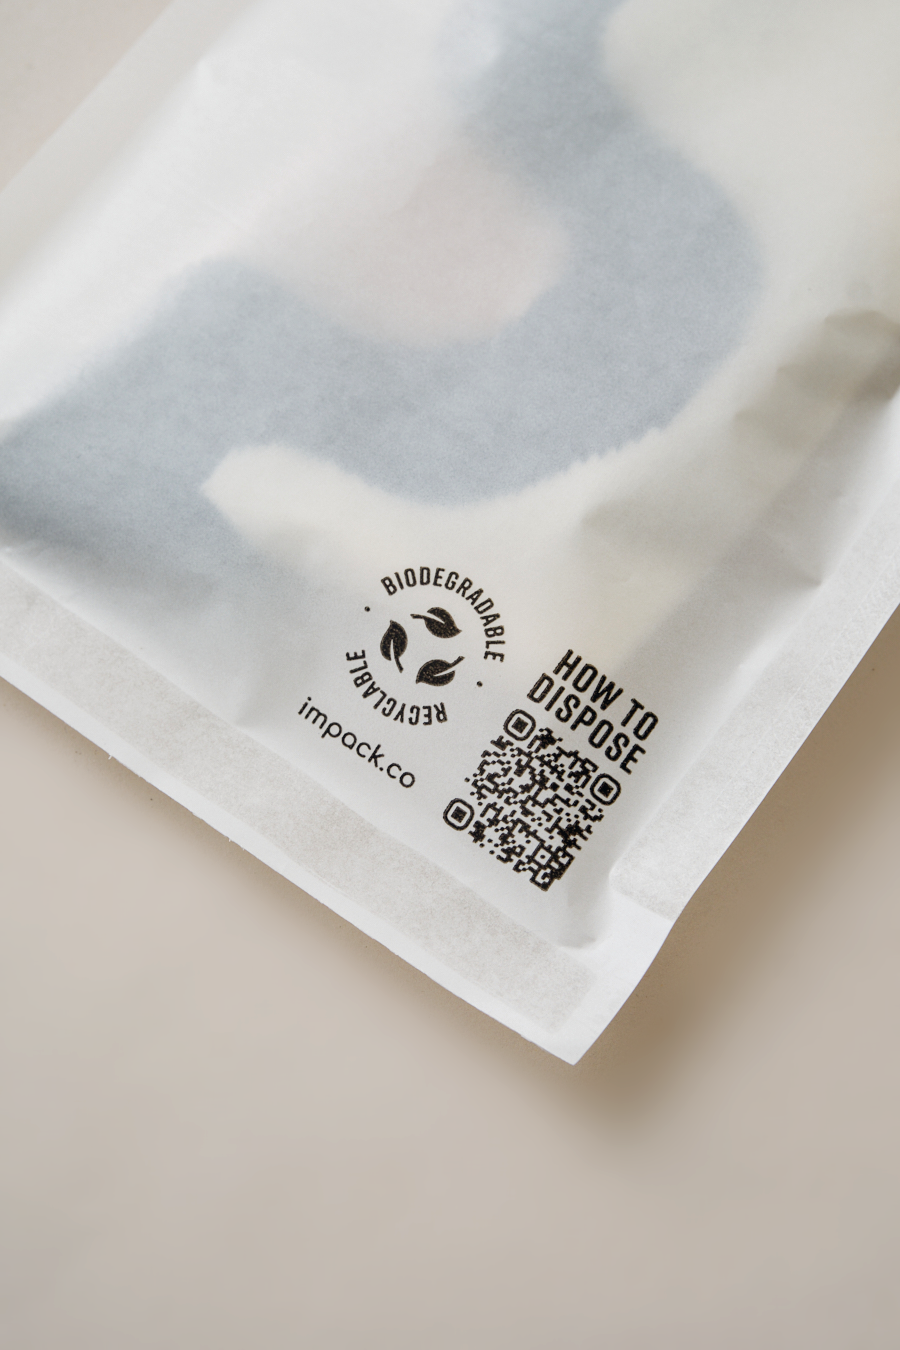 Close-up of a biodegradable packaging with a QR code and text instructions for disposal. The package features a logo and the website "impack.co" for the Glassine Bags 5.6" x 8.6" by impack.co.